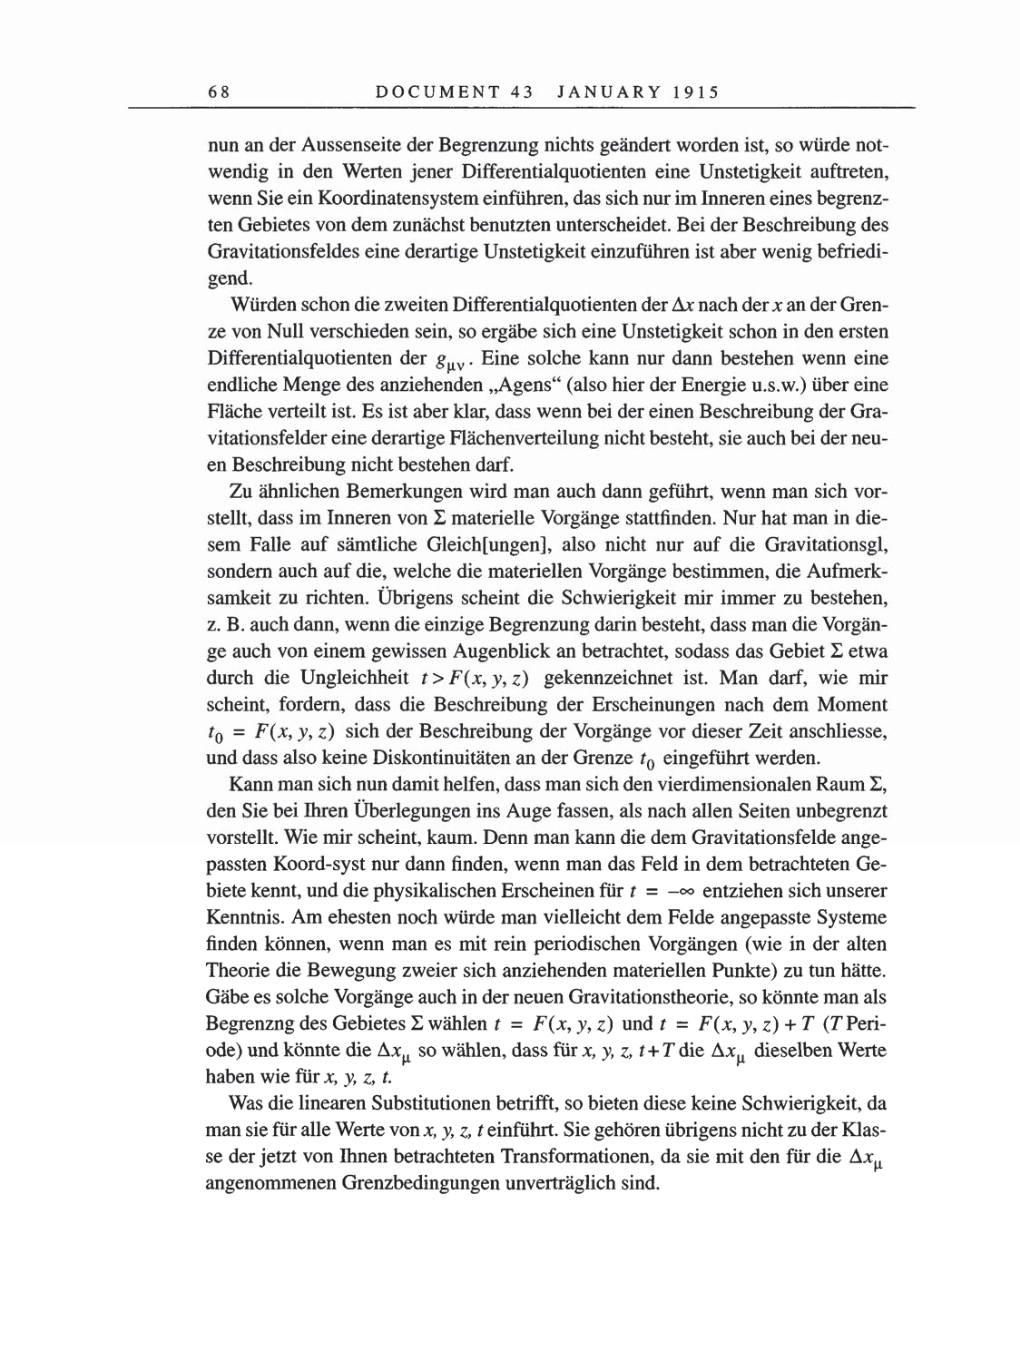 Volume 8, Part A: The Berlin Years: Correspondence 1914-1917 page 68